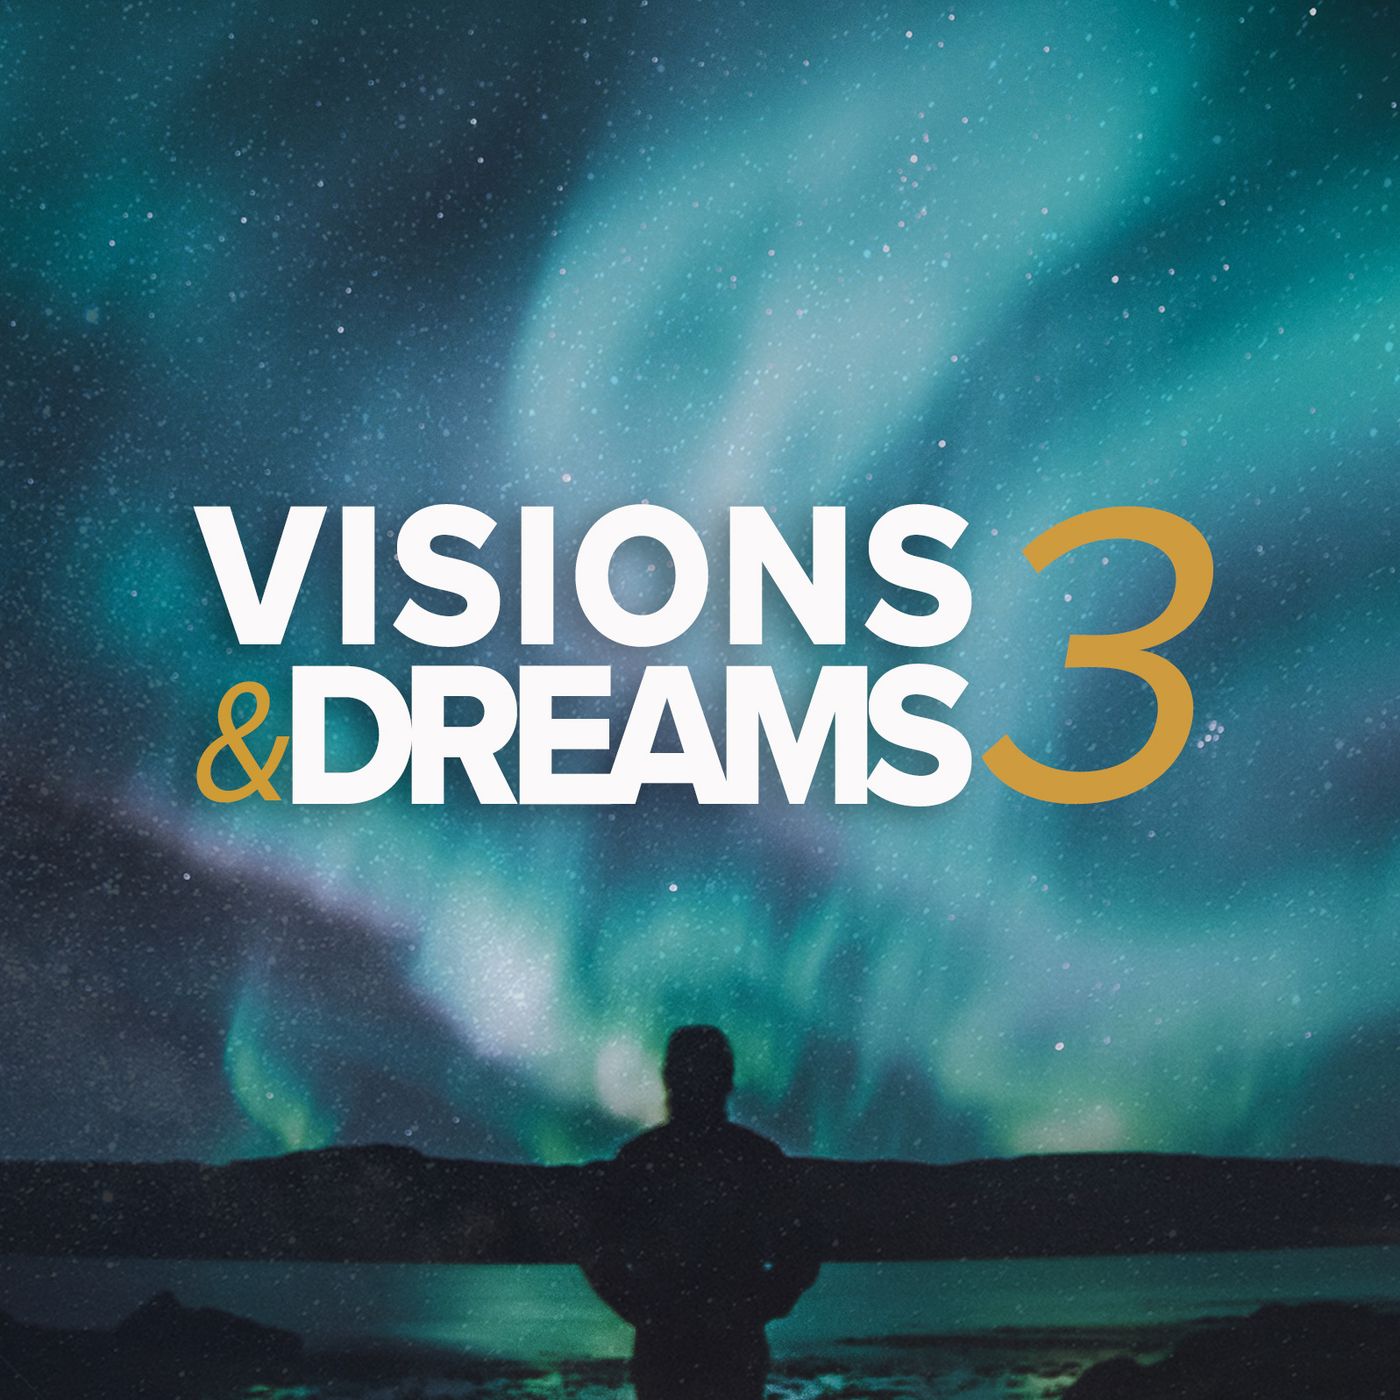 Visions & Dreams #3 :  Saturated in Faith not Dominated by Fear